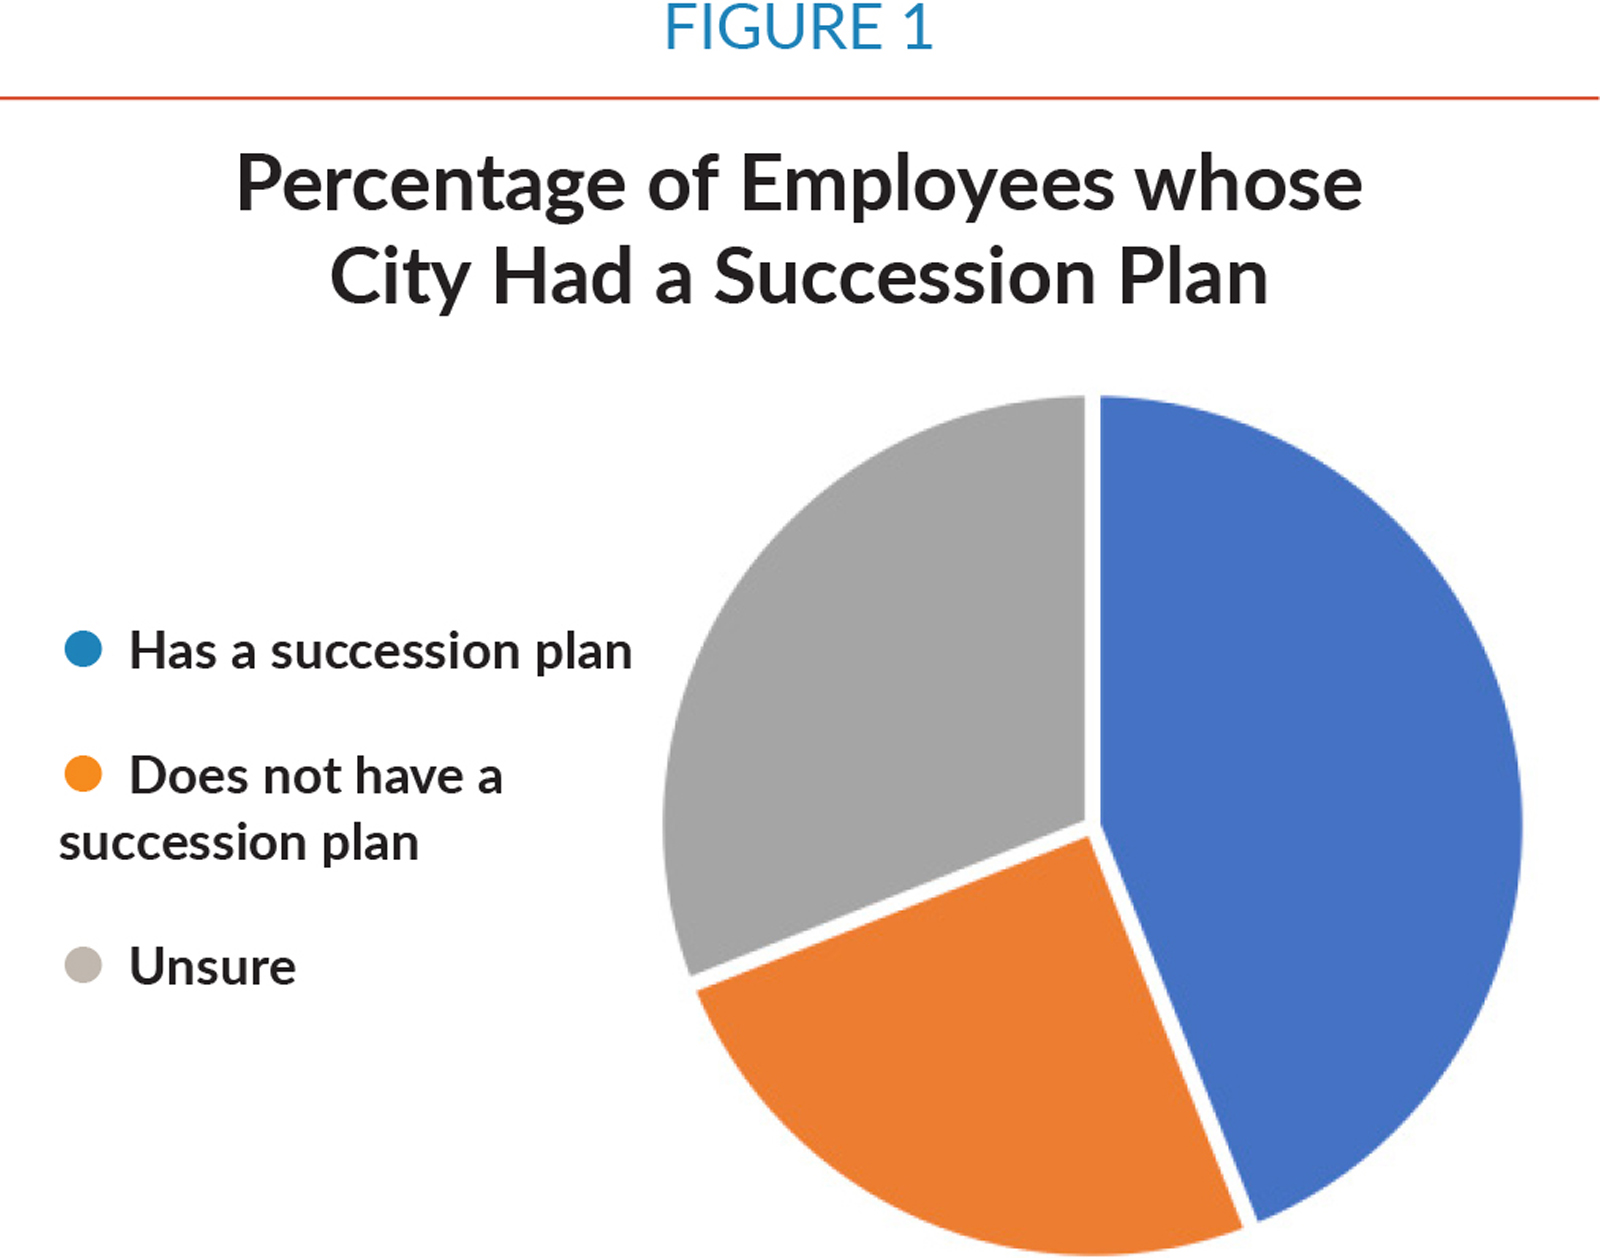 Pie chart showing percentage of employees whose city had a succession plan